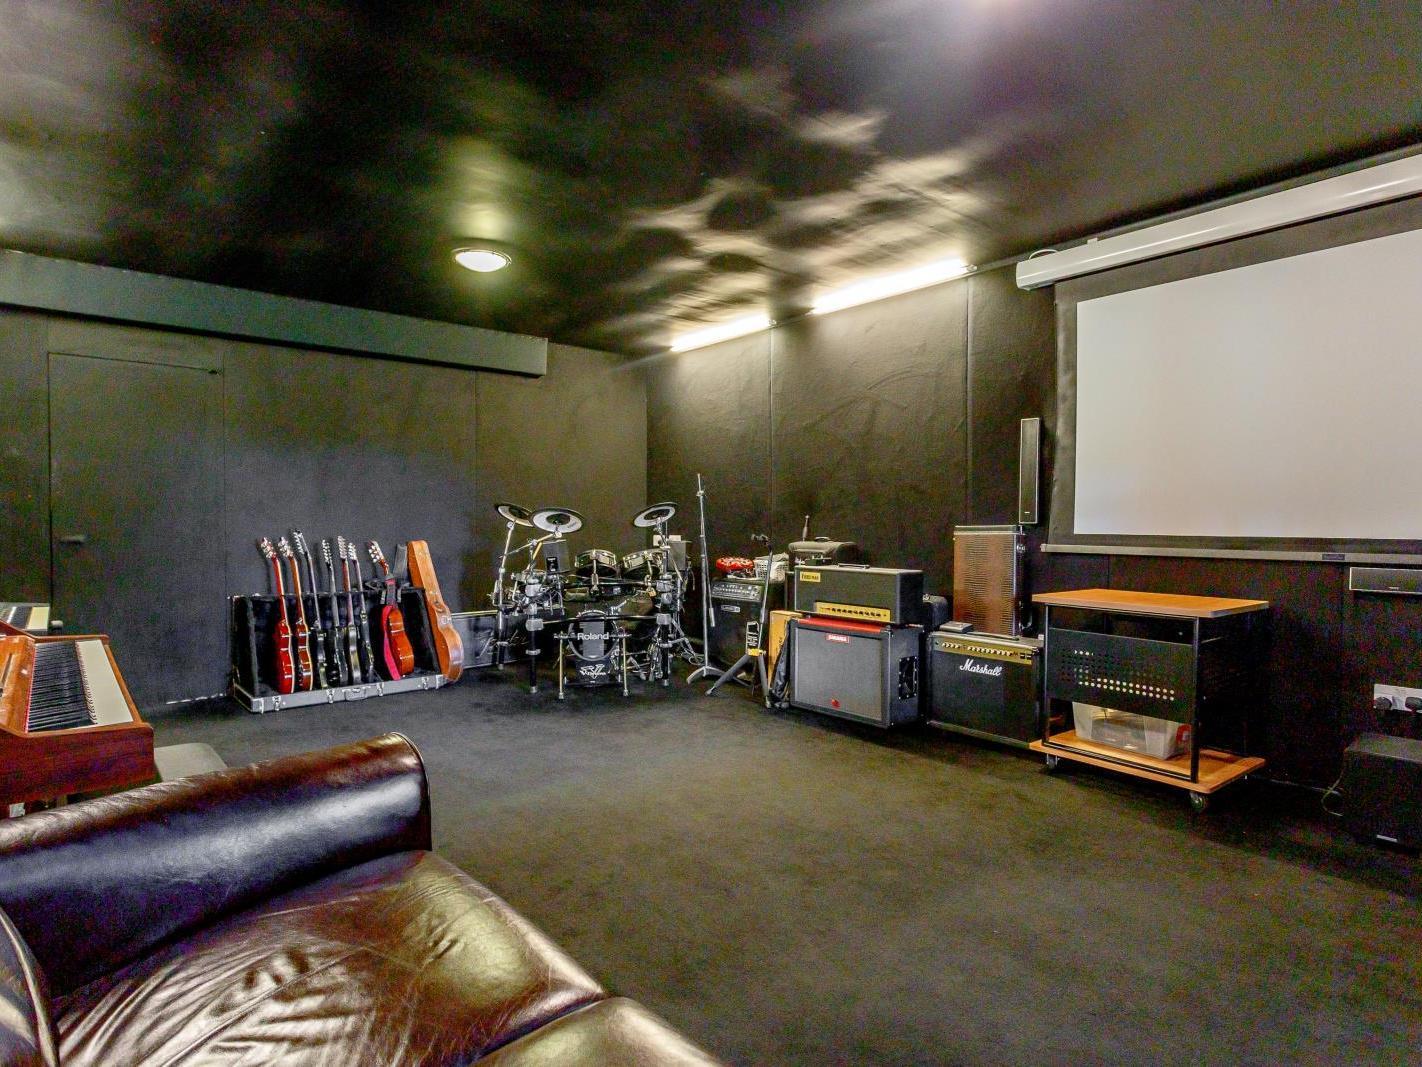 The home cinema is located on the lower floor. Photo: Fine and Country.